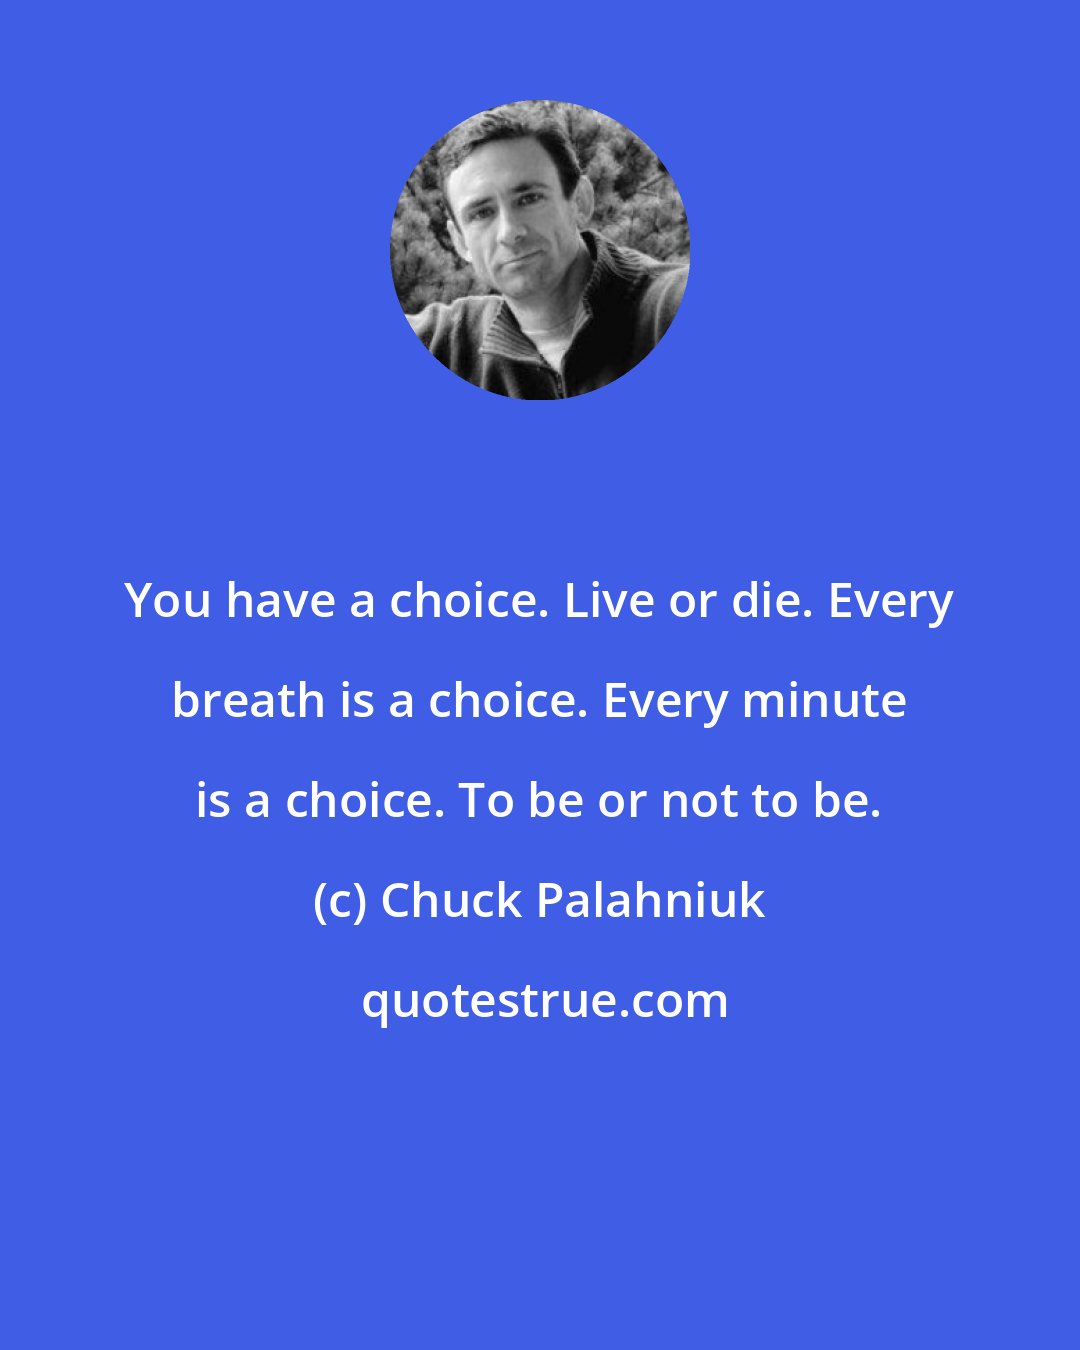 Chuck Palahniuk: You have a choice. Live or die. Every breath is a choice. Every minute is a choice. To be or not to be.